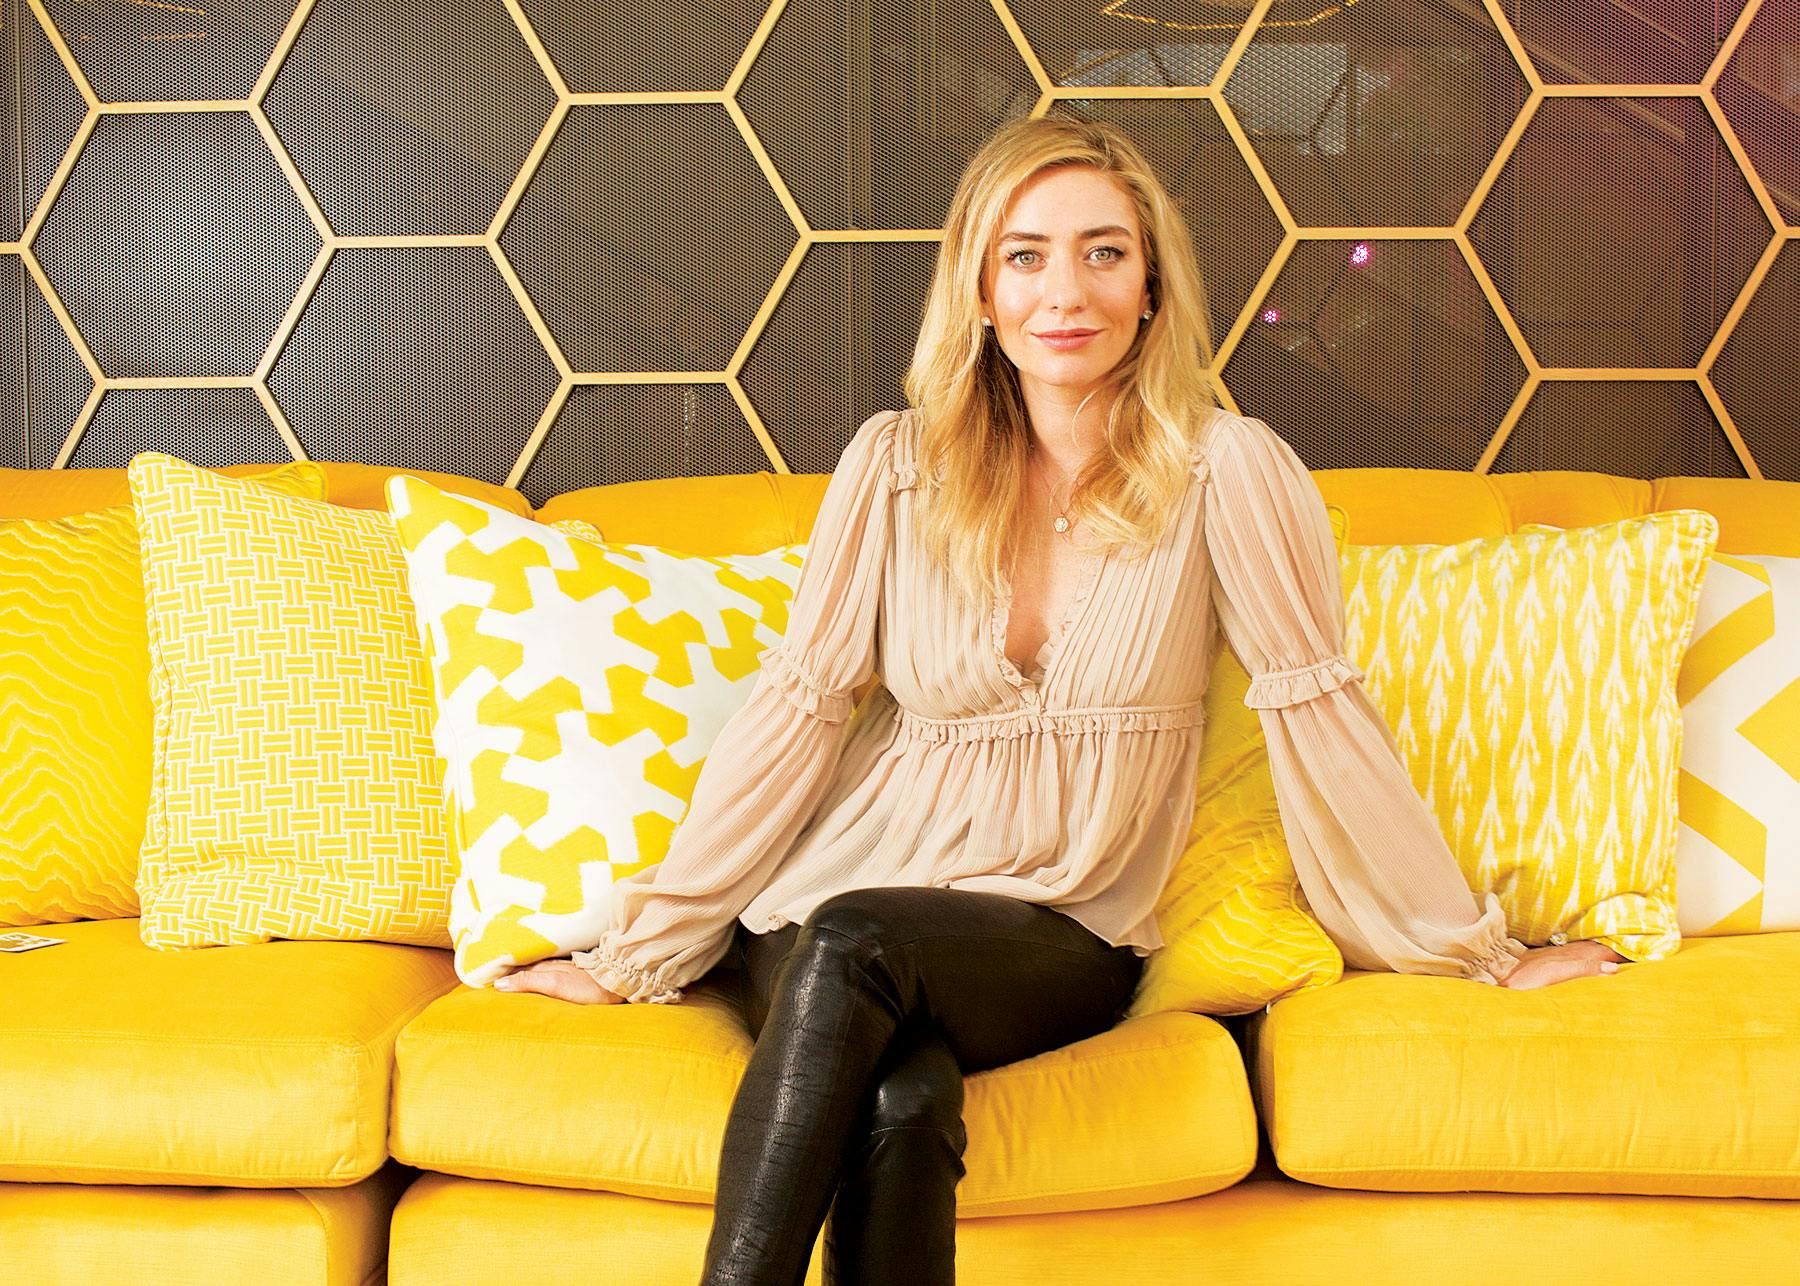 Amanda Aims Russian - How Whitney Wolfe Herd Changed the Dating Game â€“ Texas Monthly